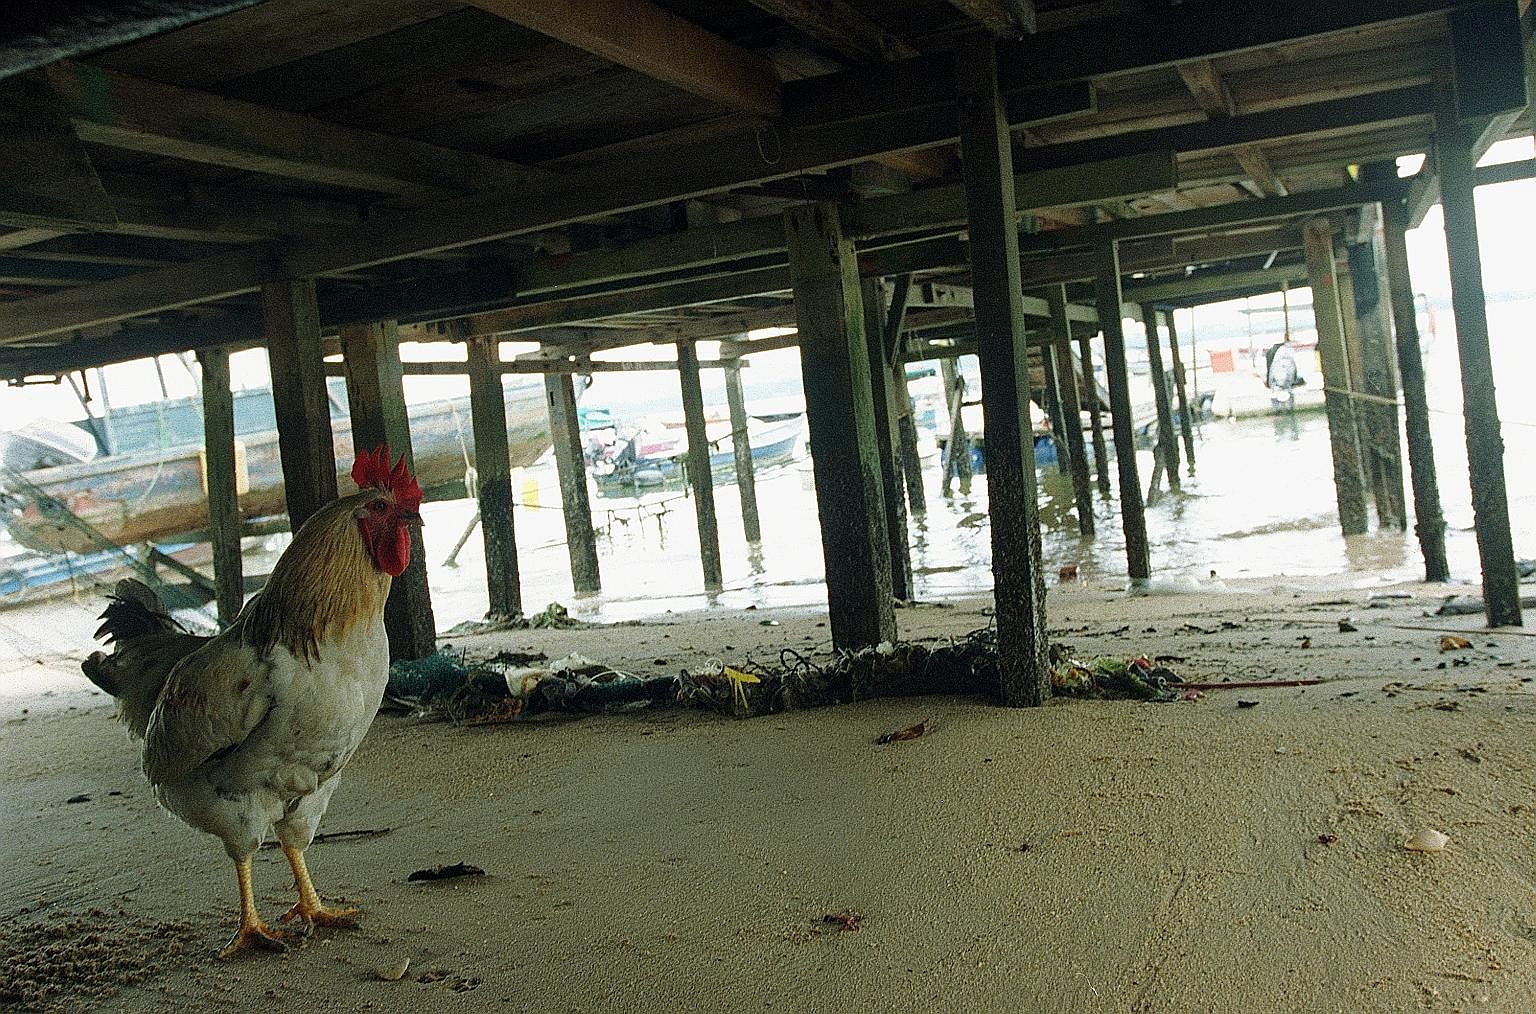 Those living in private residences can keep chickens as long as they adhere to AVA rules.